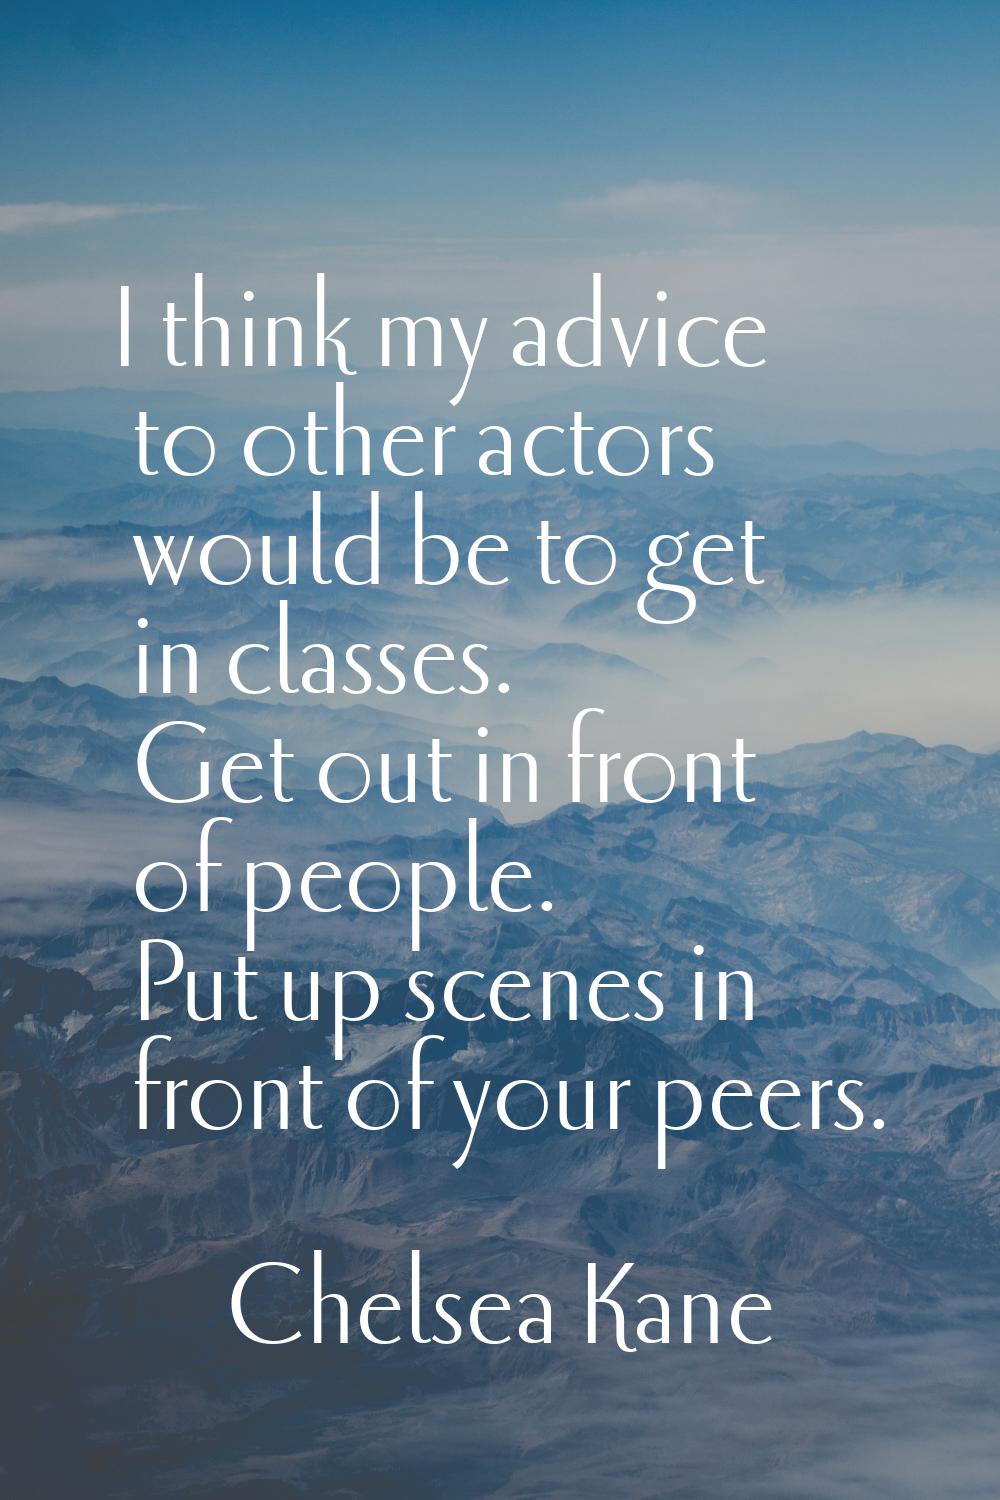 I think my advice to other actors would be to get in classes. Get out in front of people. Put up sc